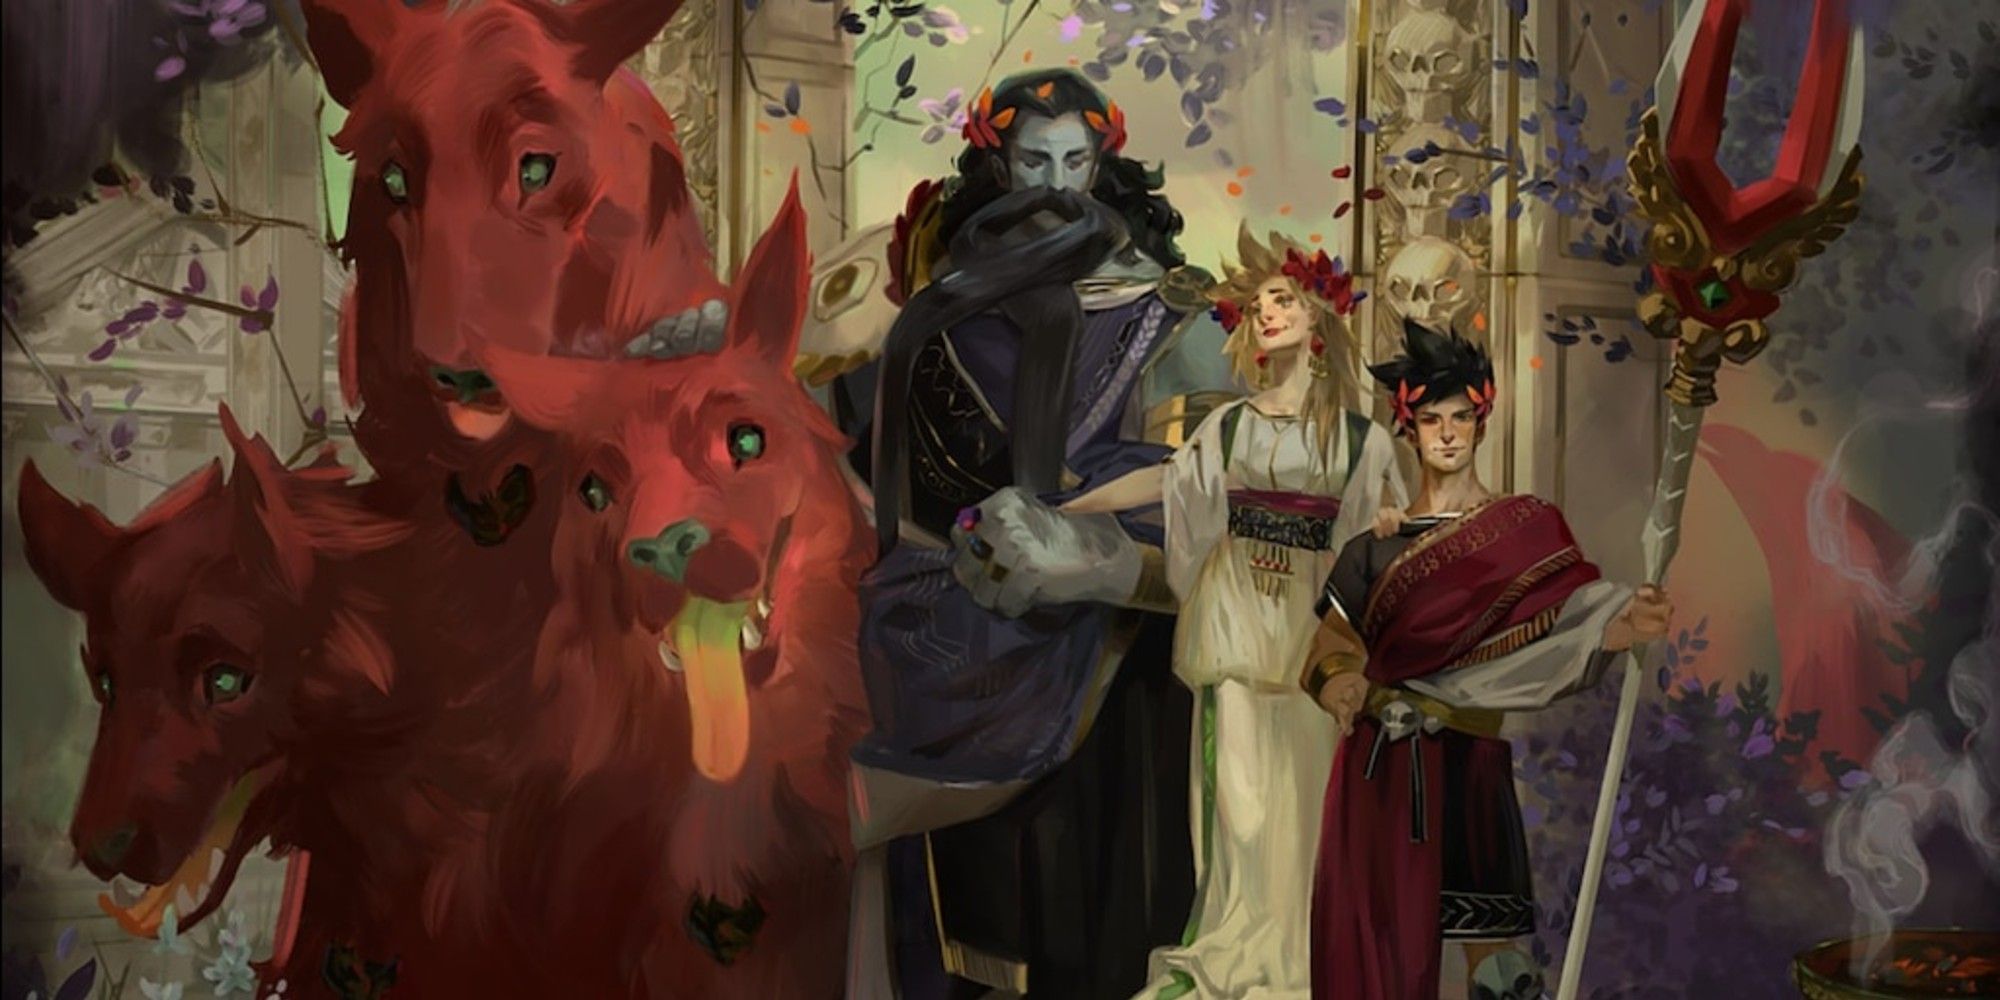 A portrait of Cerberus, Hades, Persephone, and Zagreus in the video game, Hades